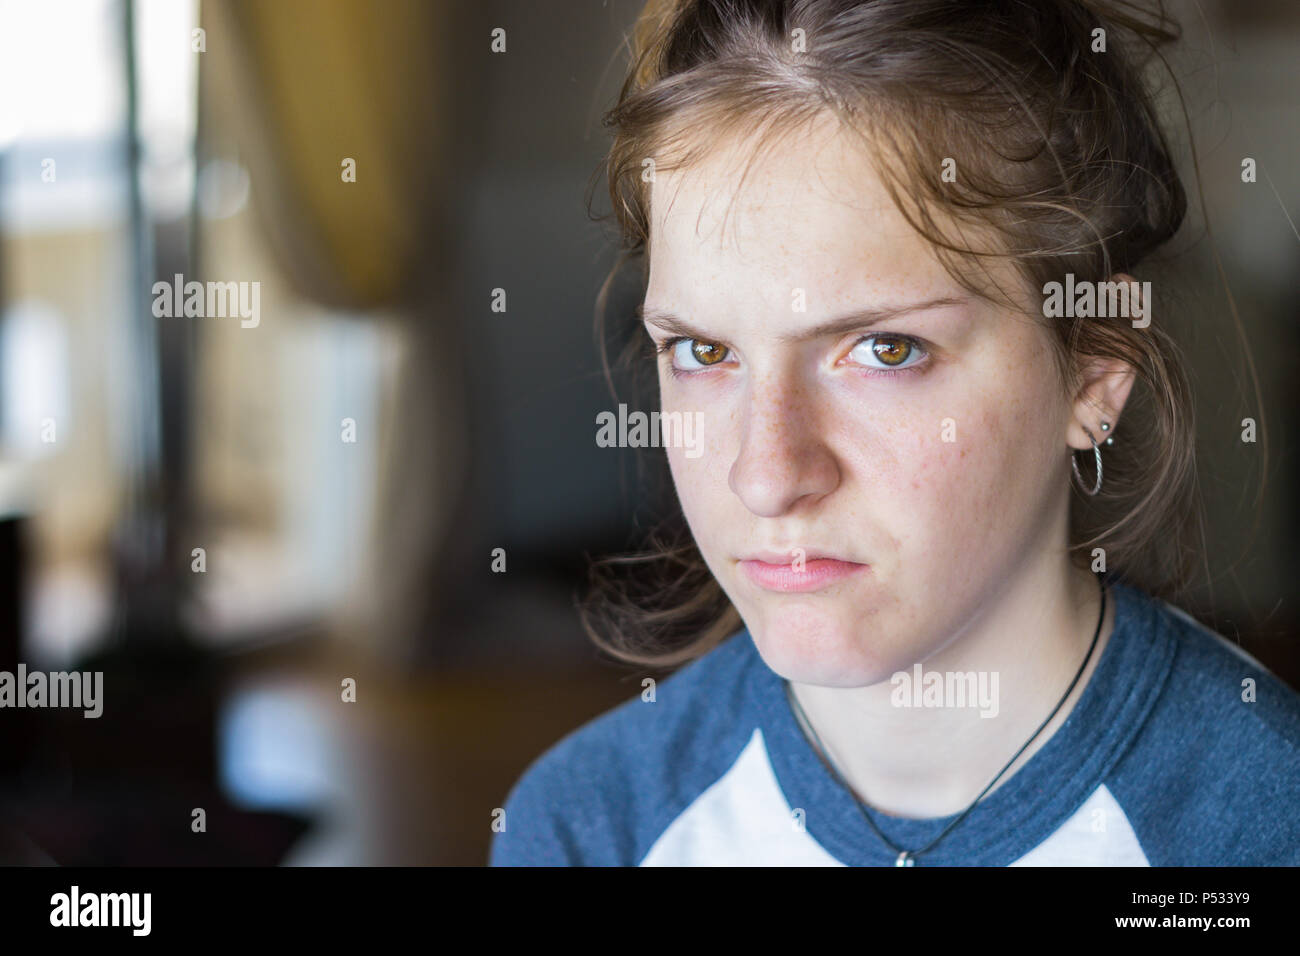 Portrait of a young girl with an anger and upset face looking camera, indoors. Stock Photo